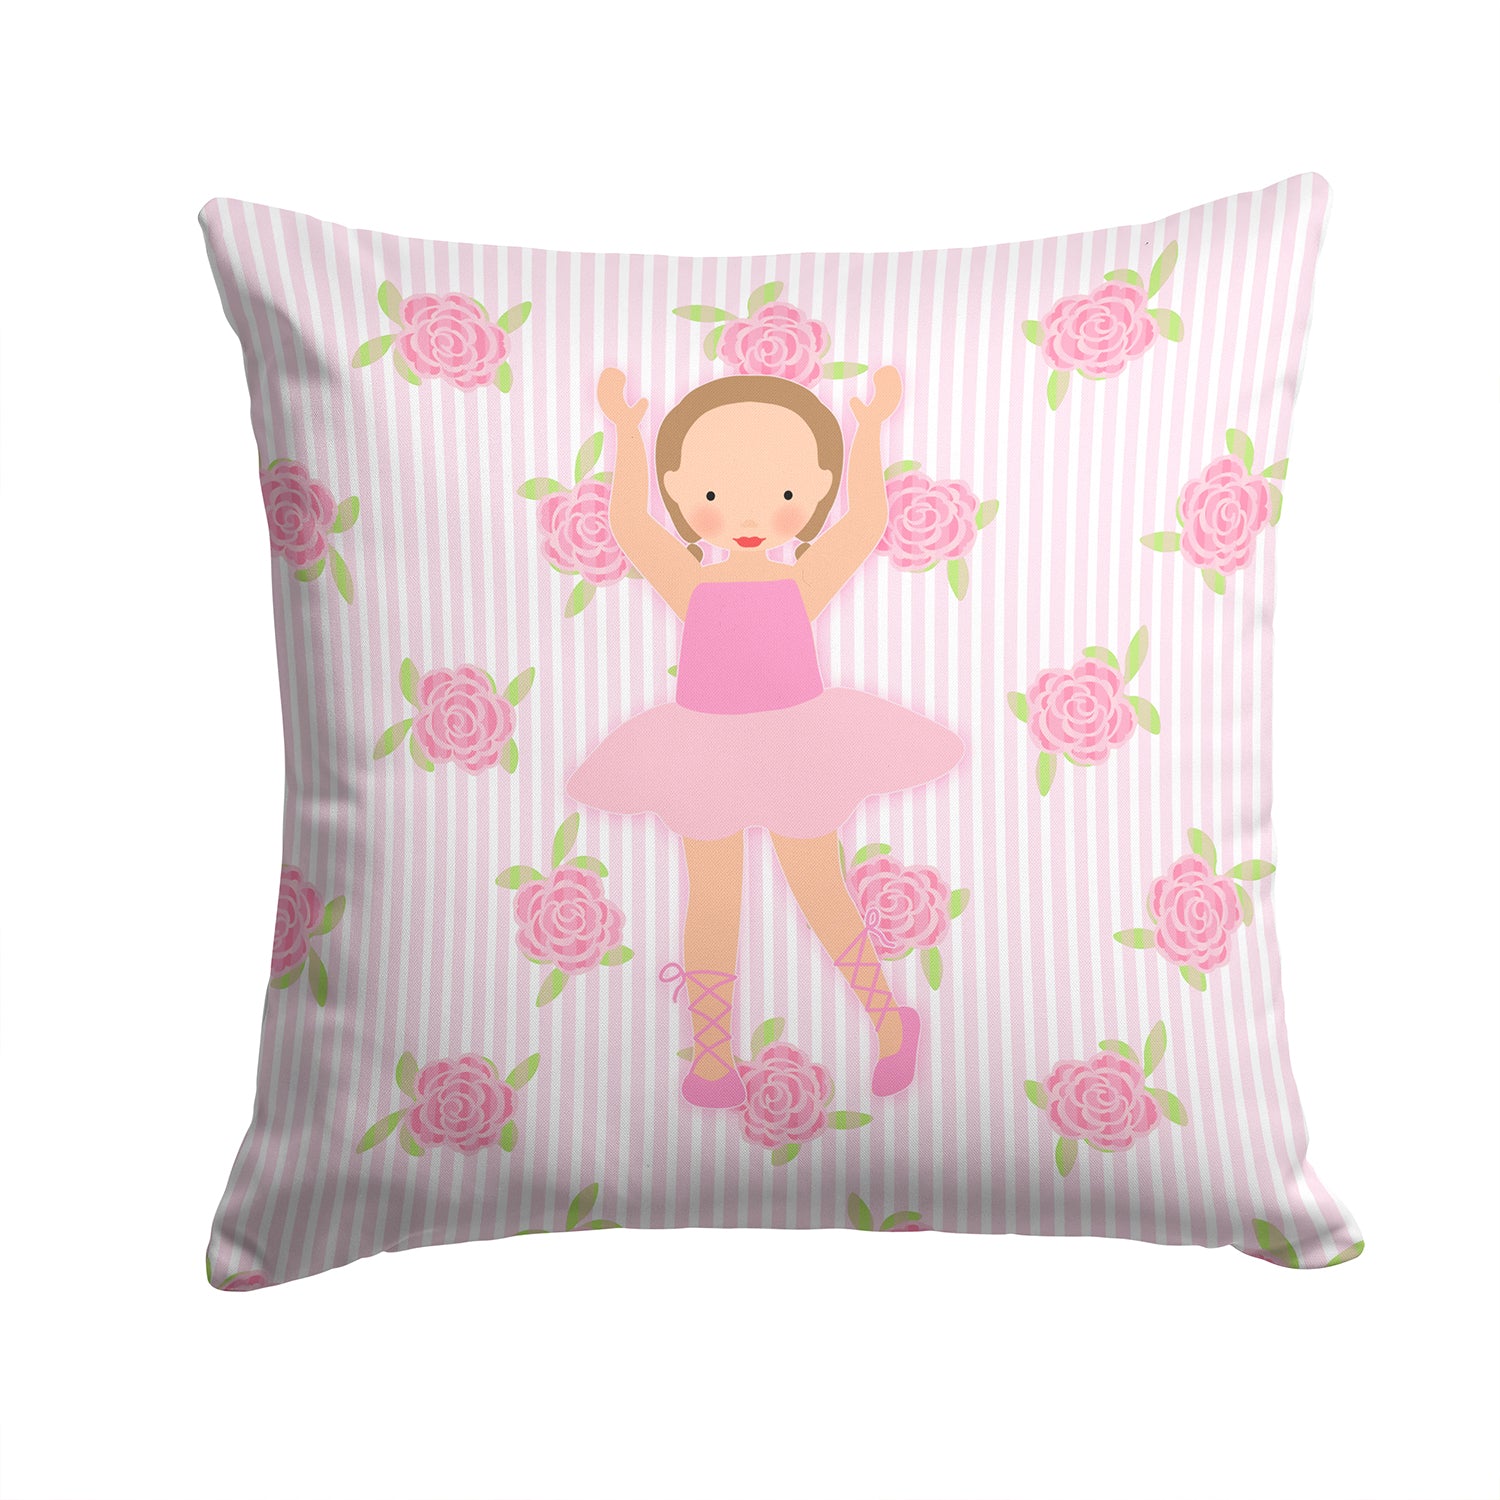 Ballerina Brown Hair Ponytails Fabric Decorative Pillow BB5189PW1414 - the-store.com